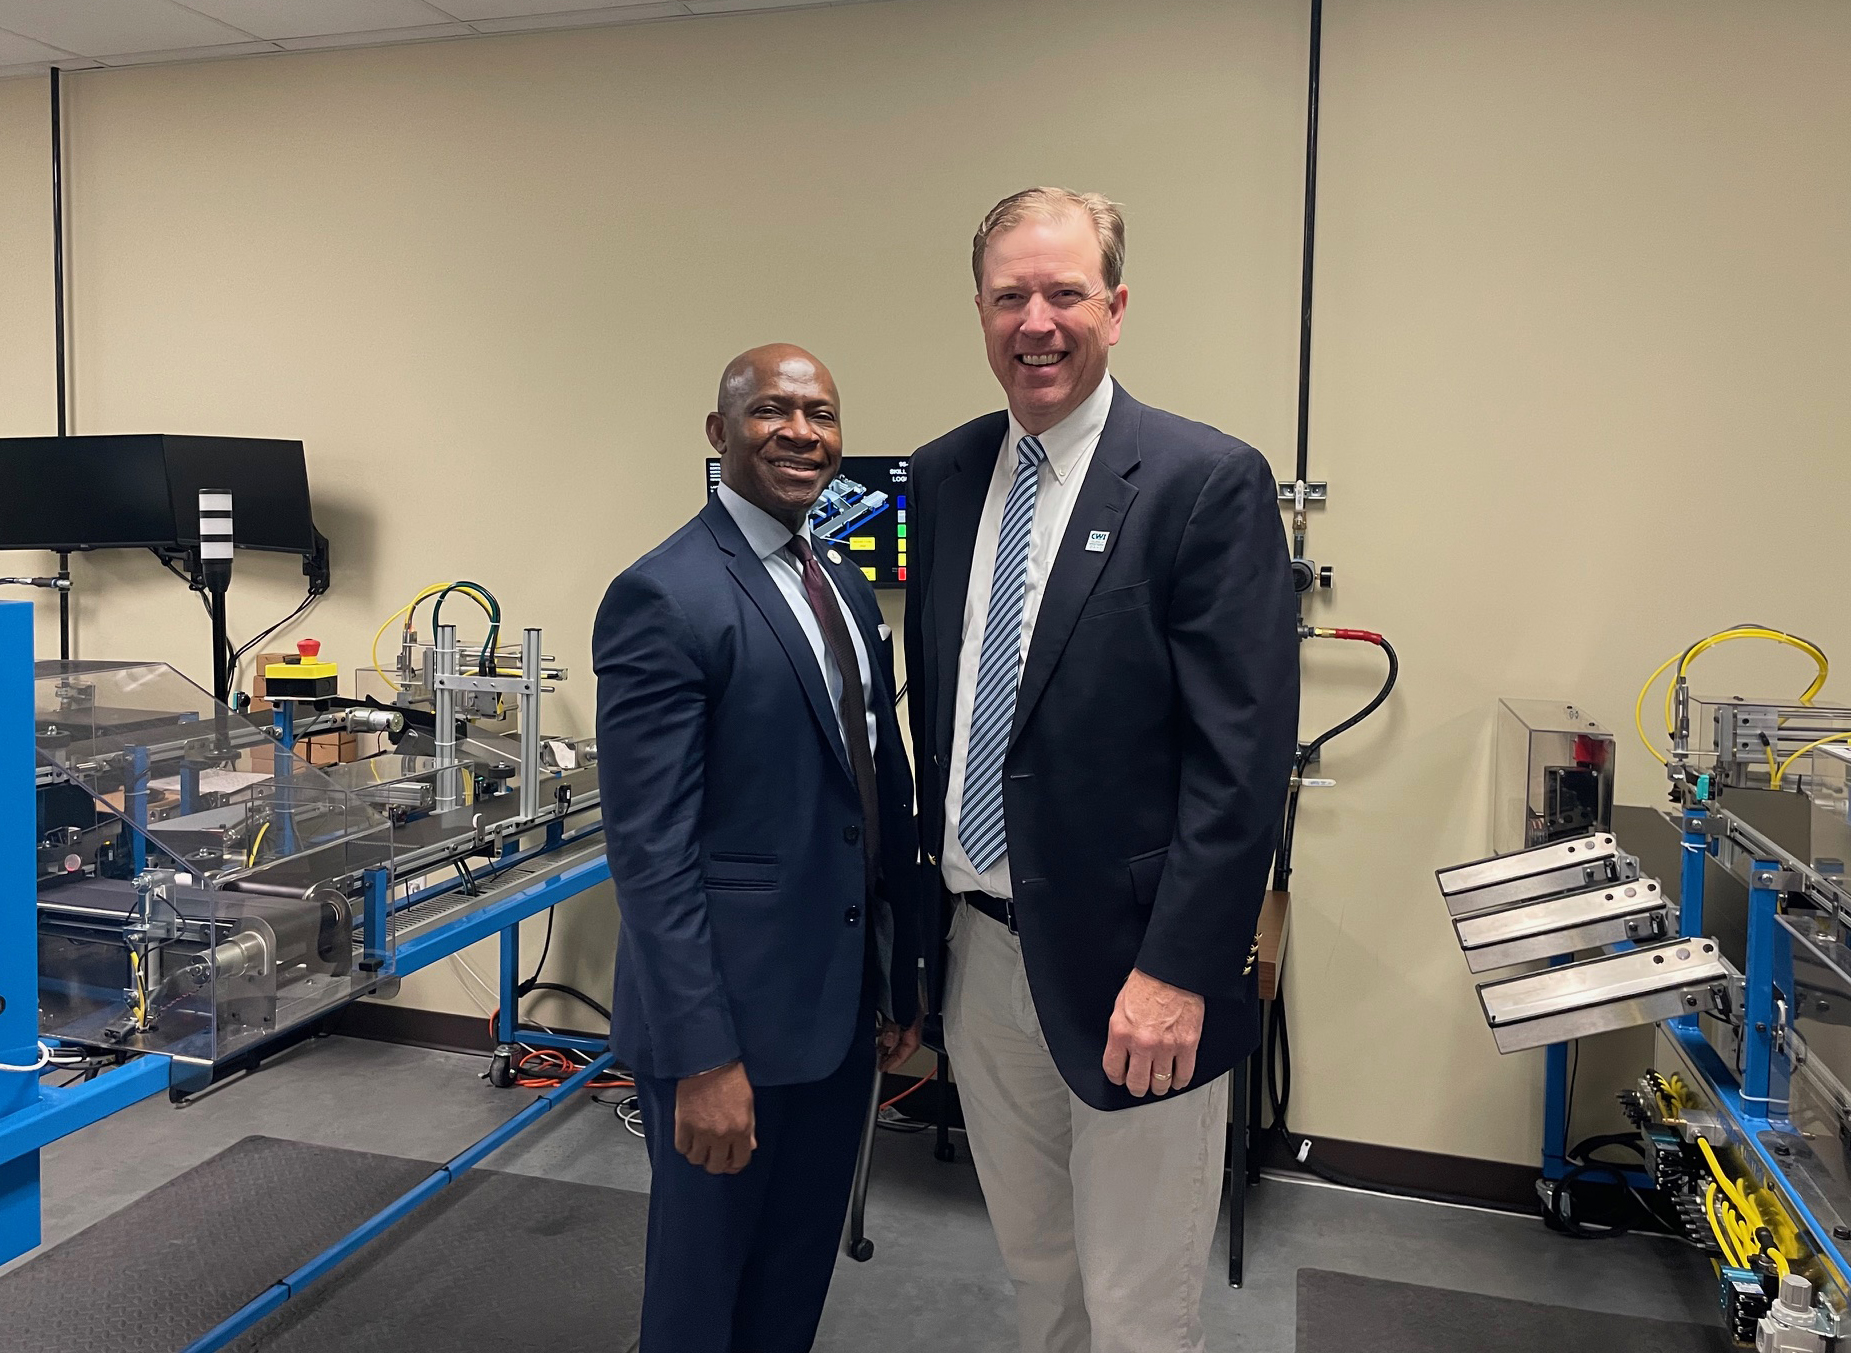 SUNY Oswego leaders met with colleagues from College of Western Idaho University to discuss their partnerships with Micron. Here SUNY Oswego President Peter O. Nwosu meets with College Western Idaho University President Gordon Jones.